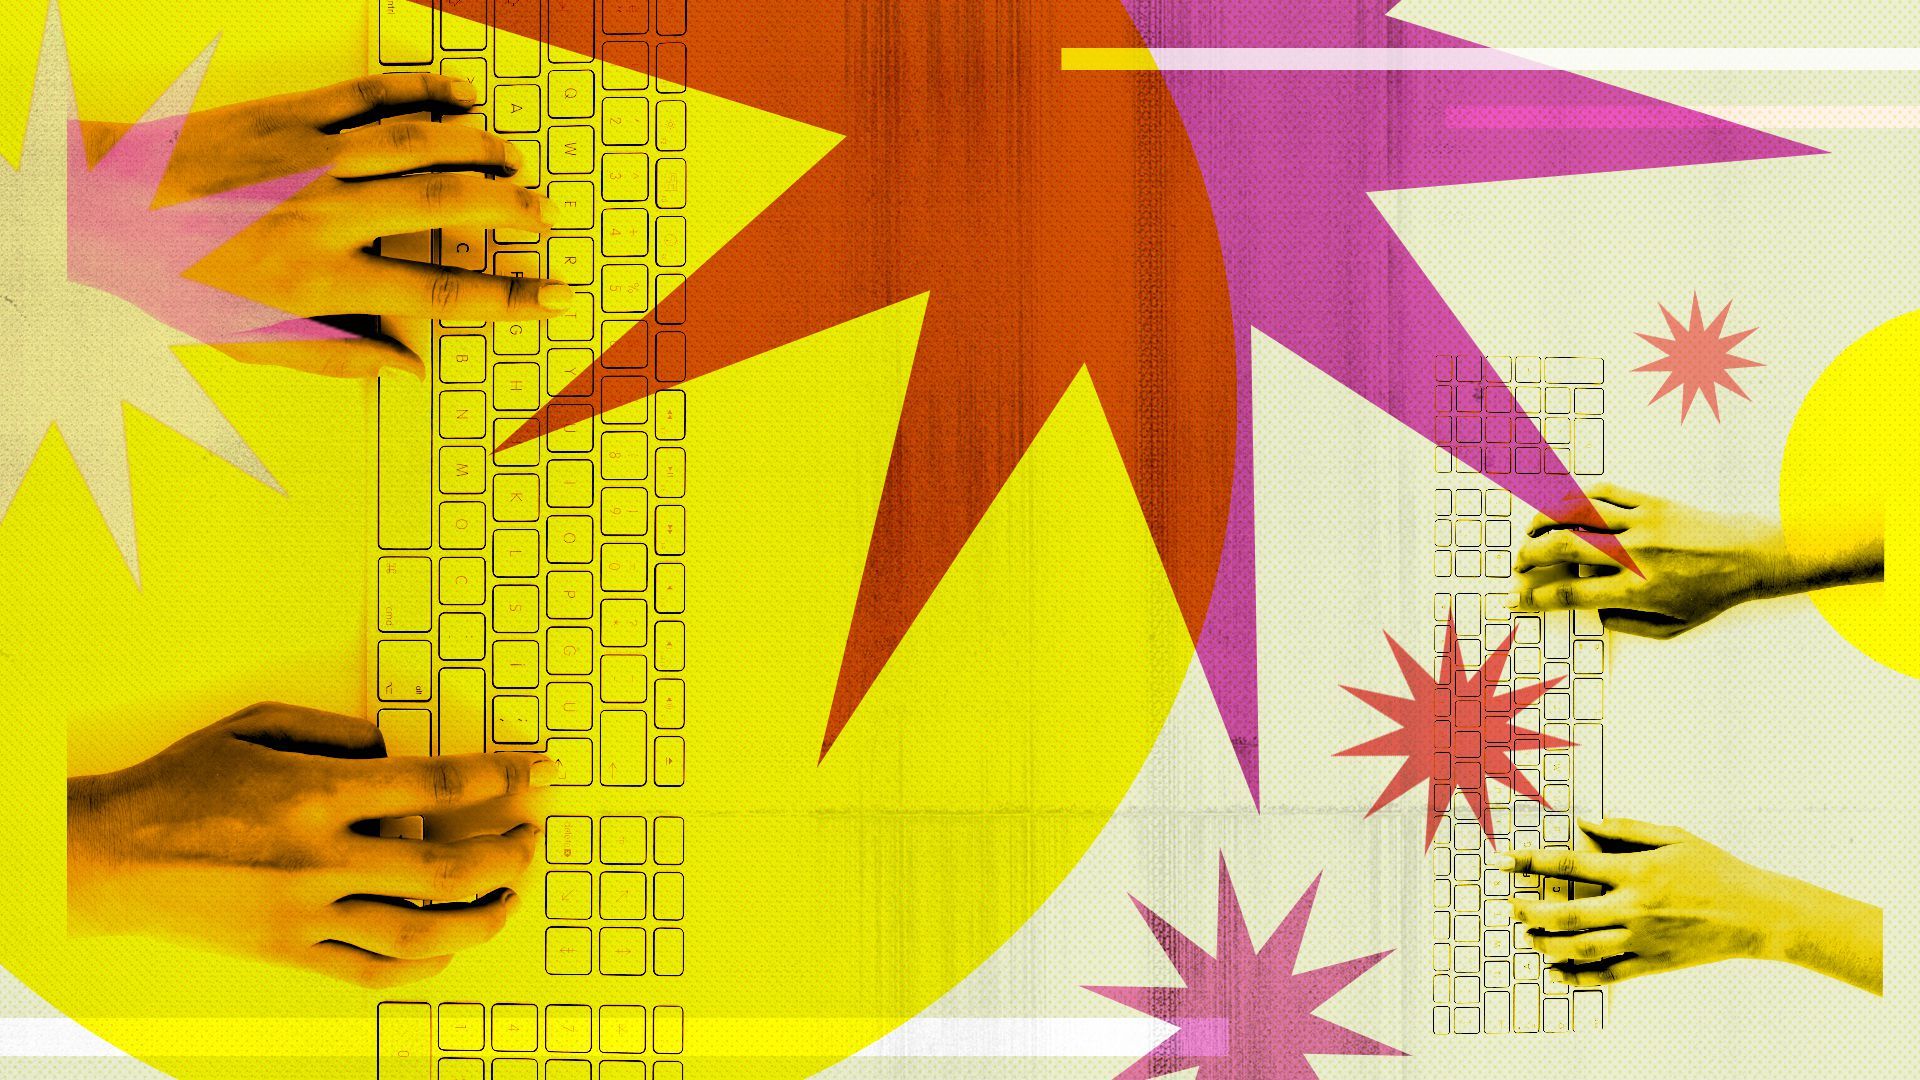 Illustration of an abstract collage of hands on computer keyboards, stars and other shapes.